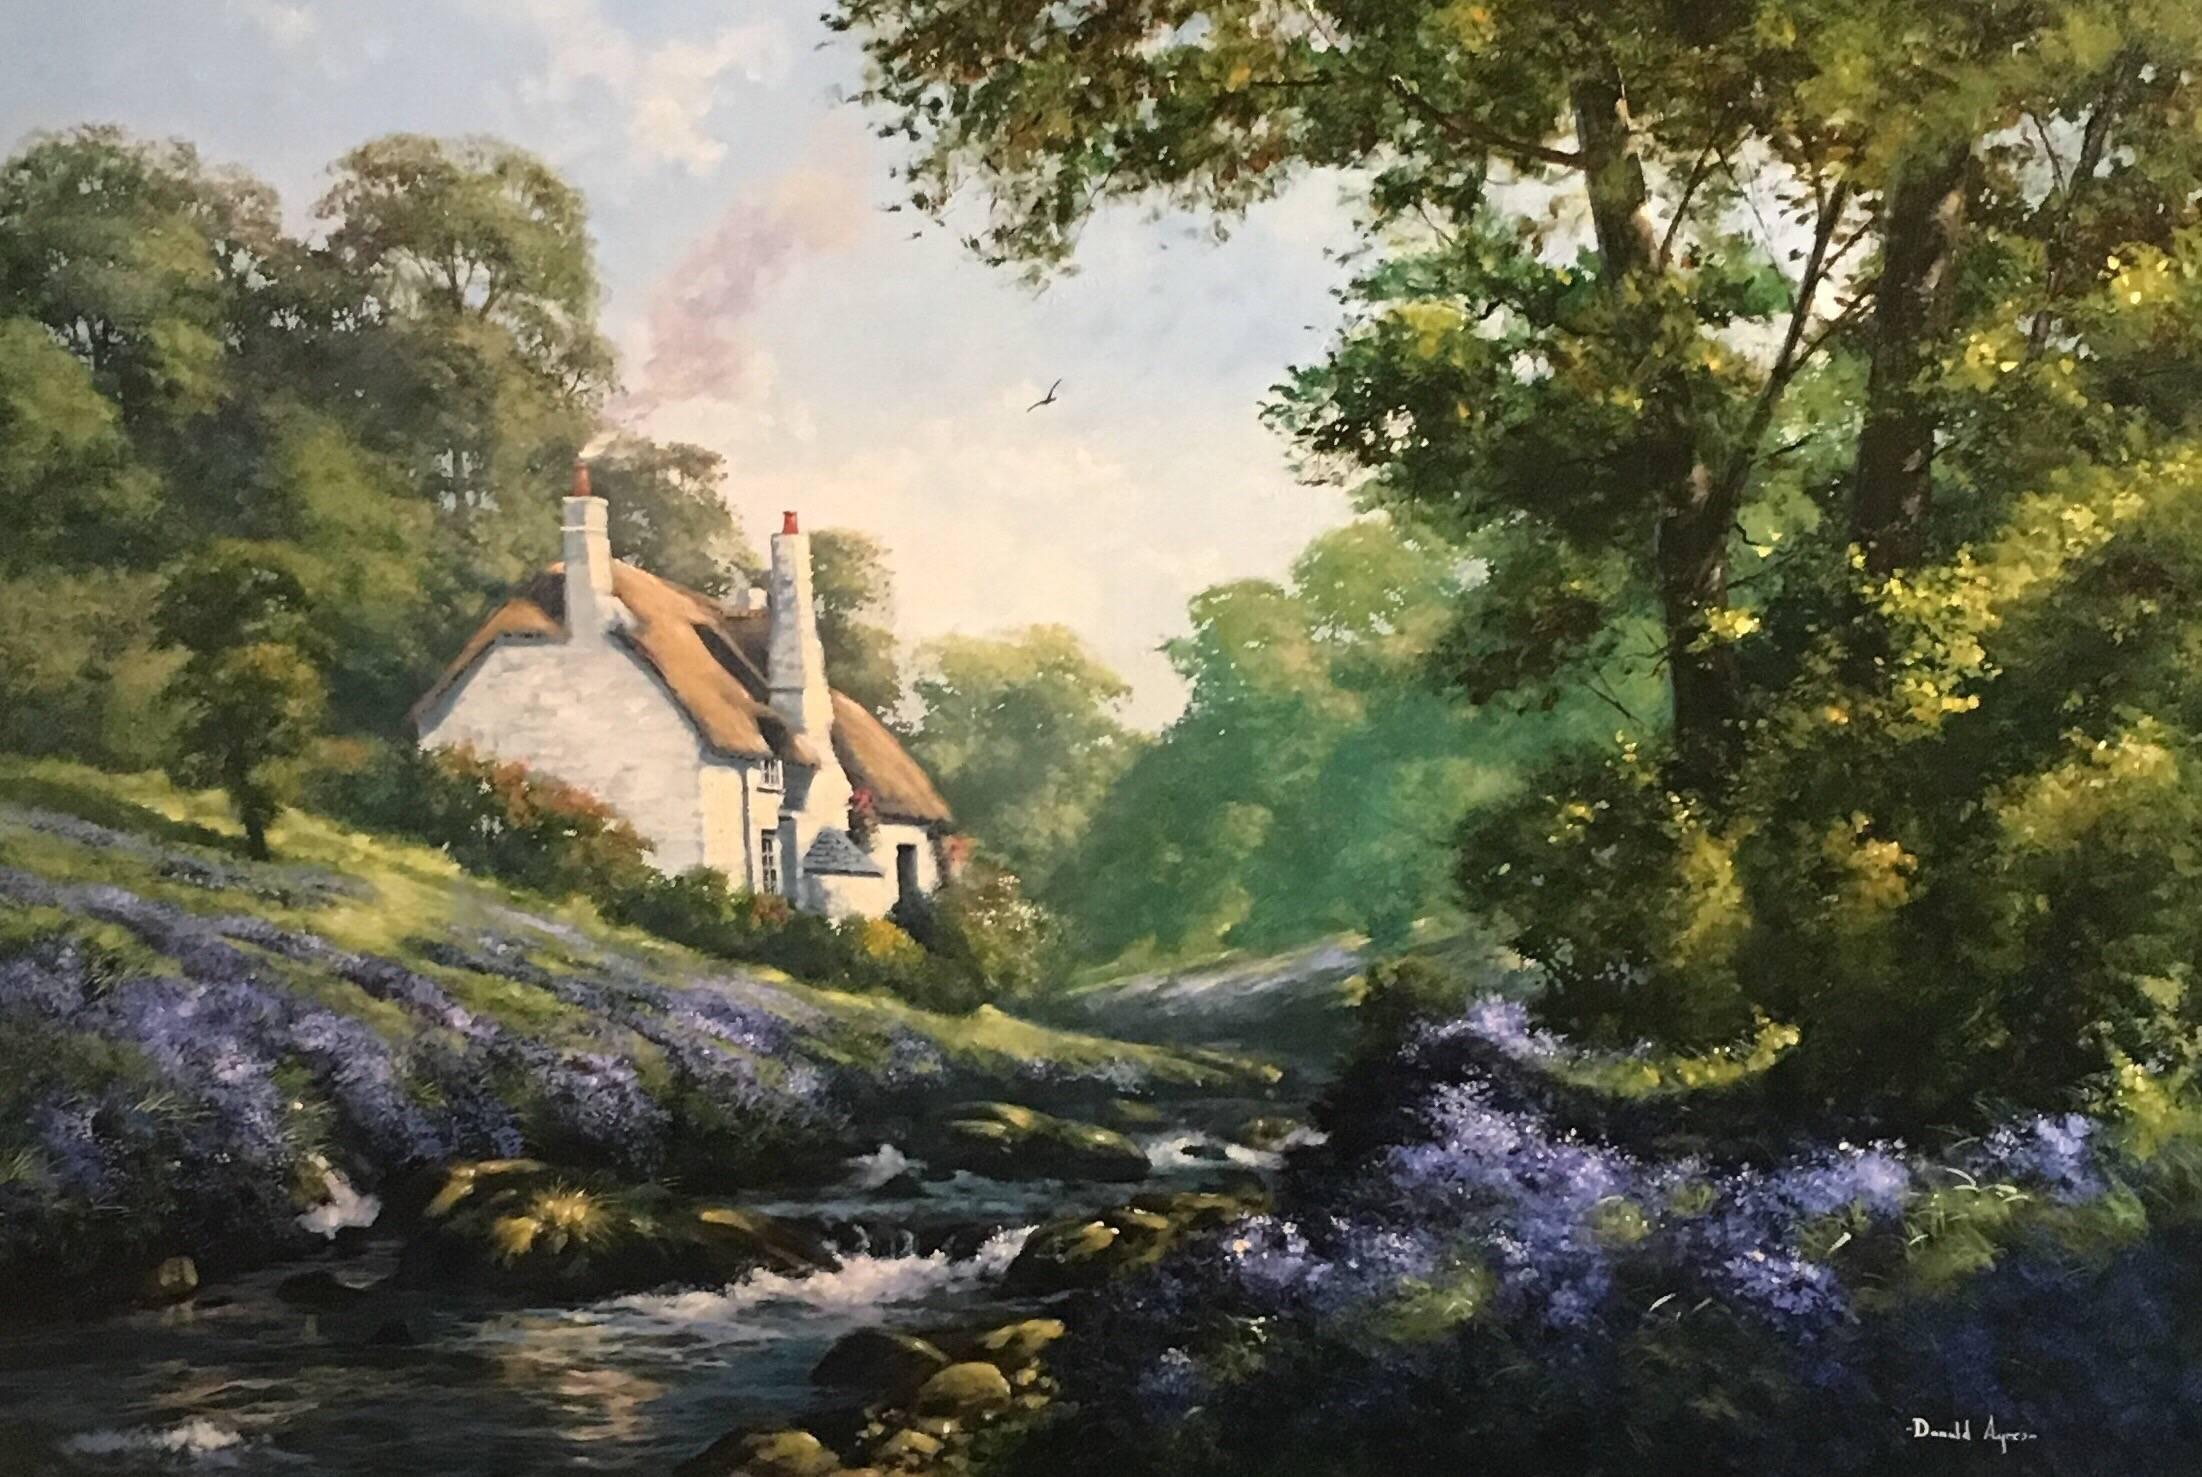 Donald Ayres Landscape Painting - Large English Oil, Bluebell Fields by a River Cottage in Exmoor